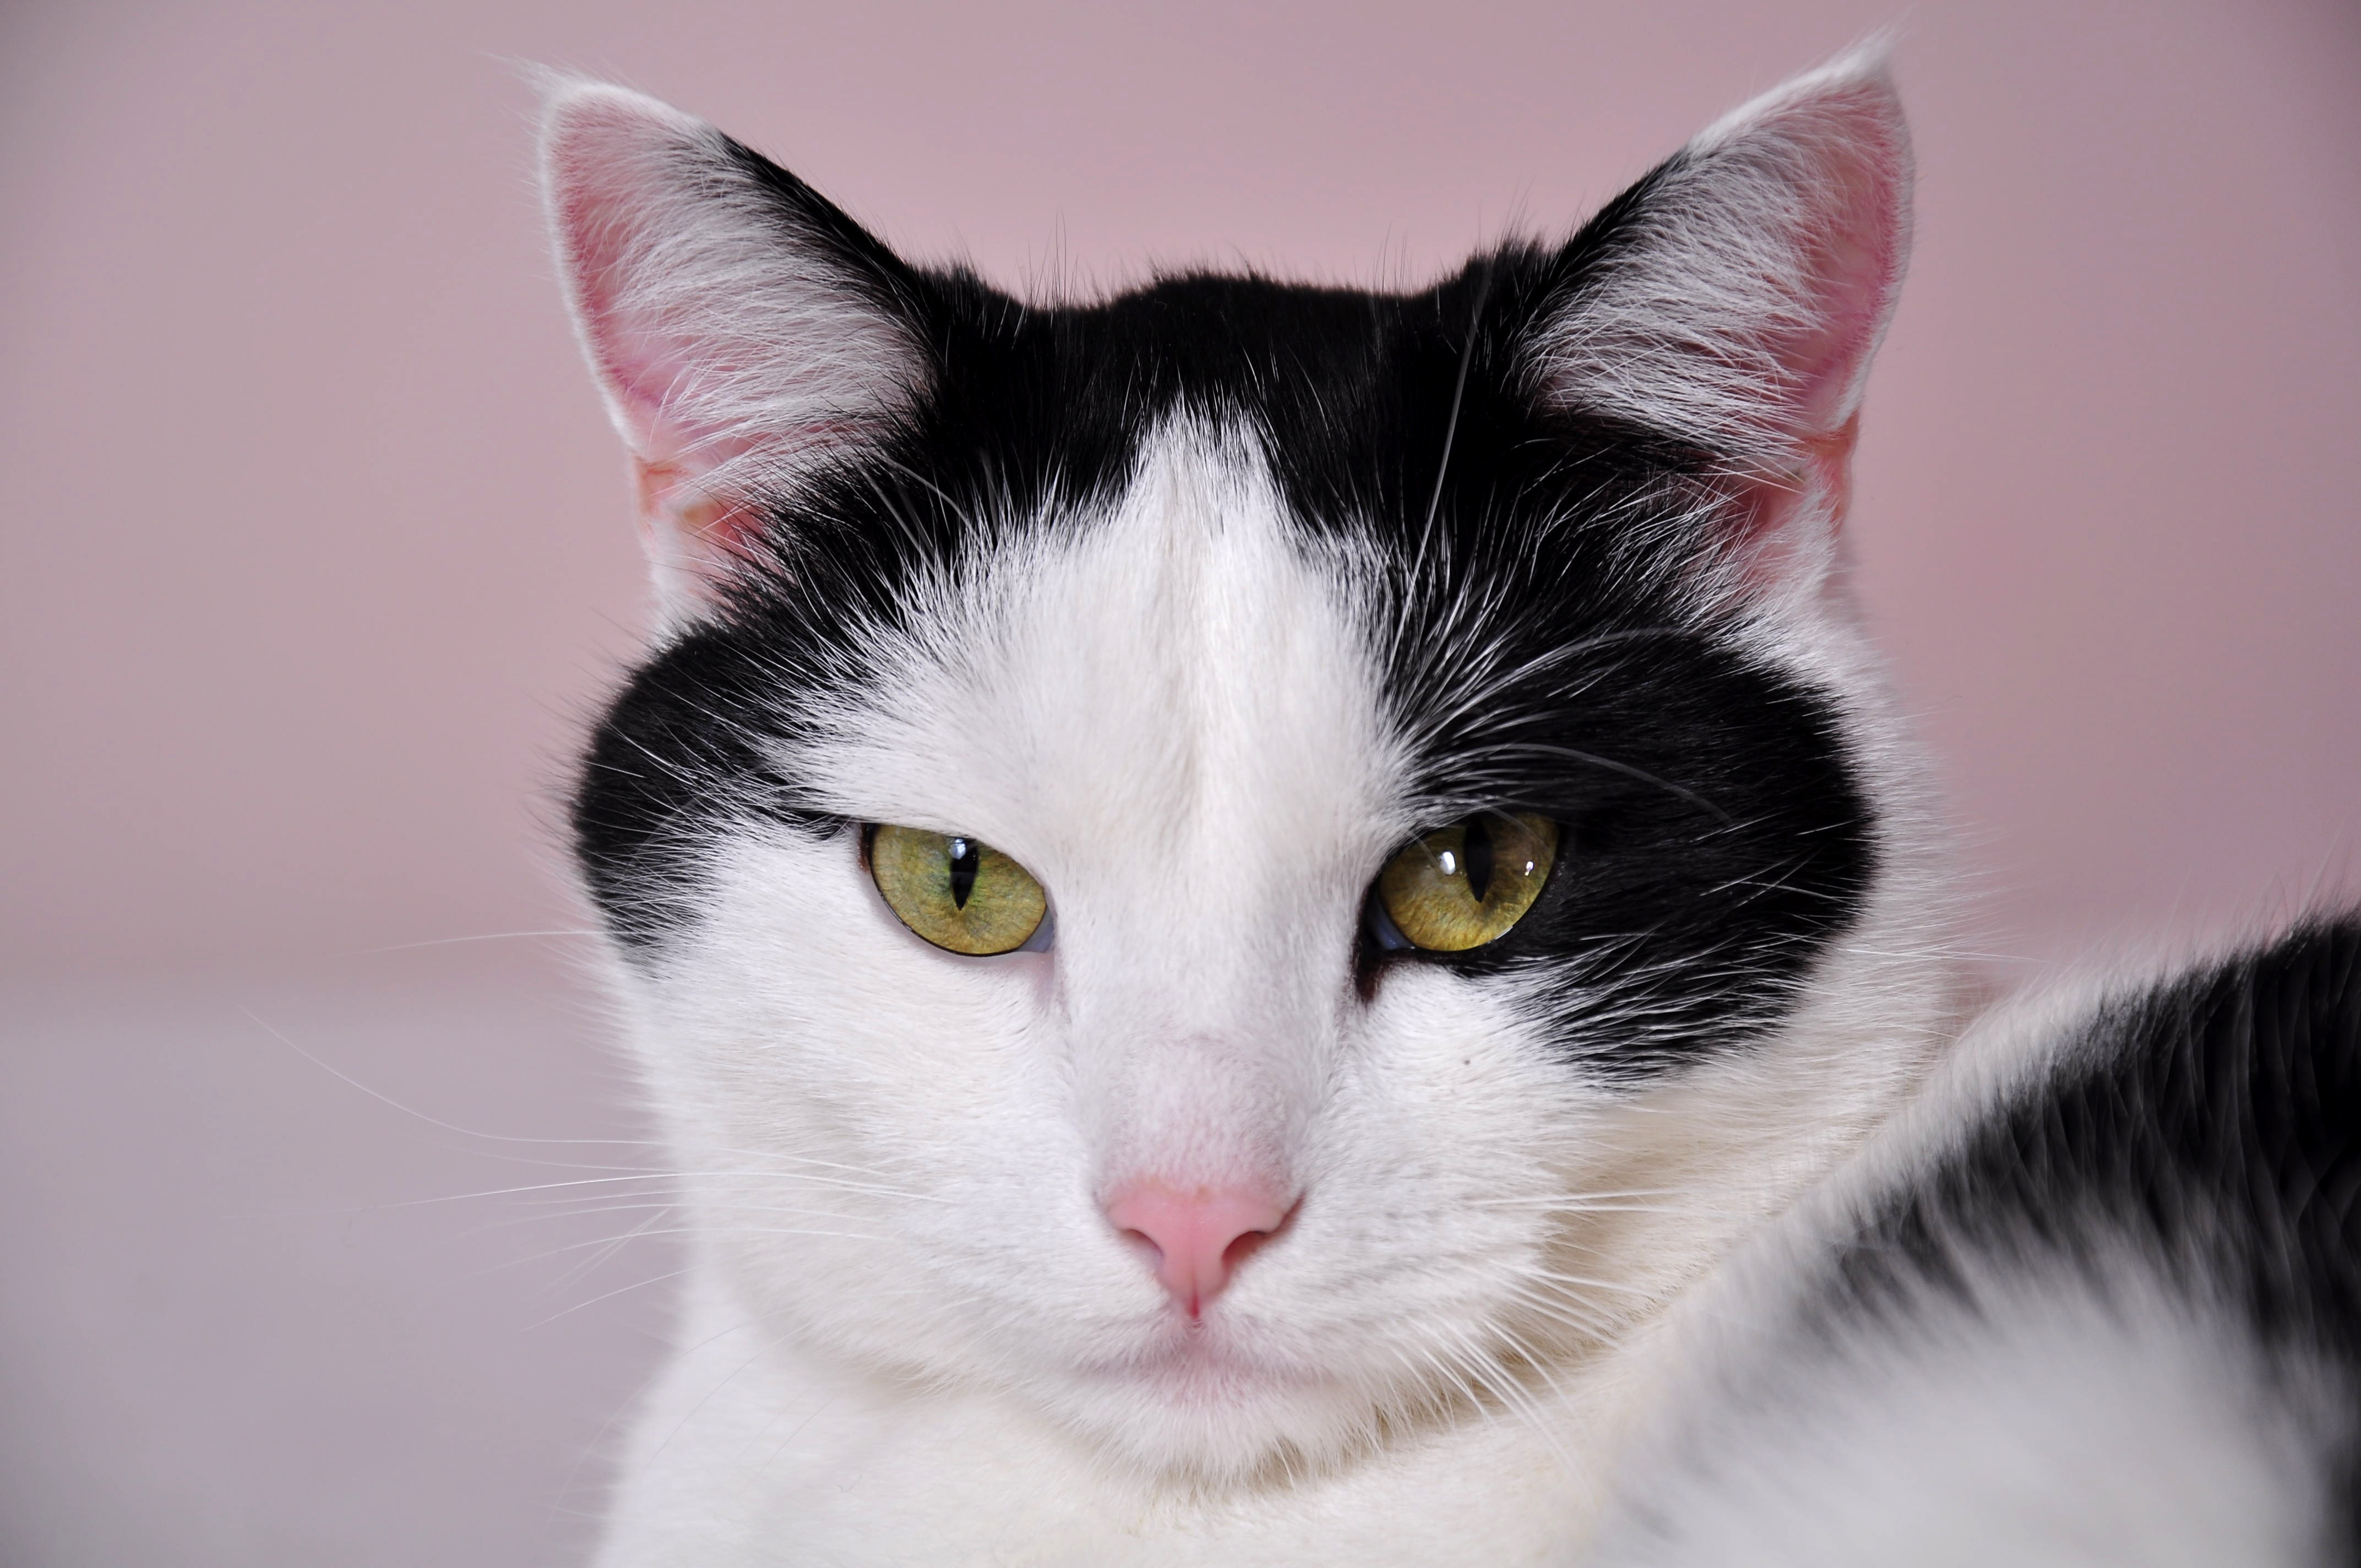 A black and white cat with green eyes.